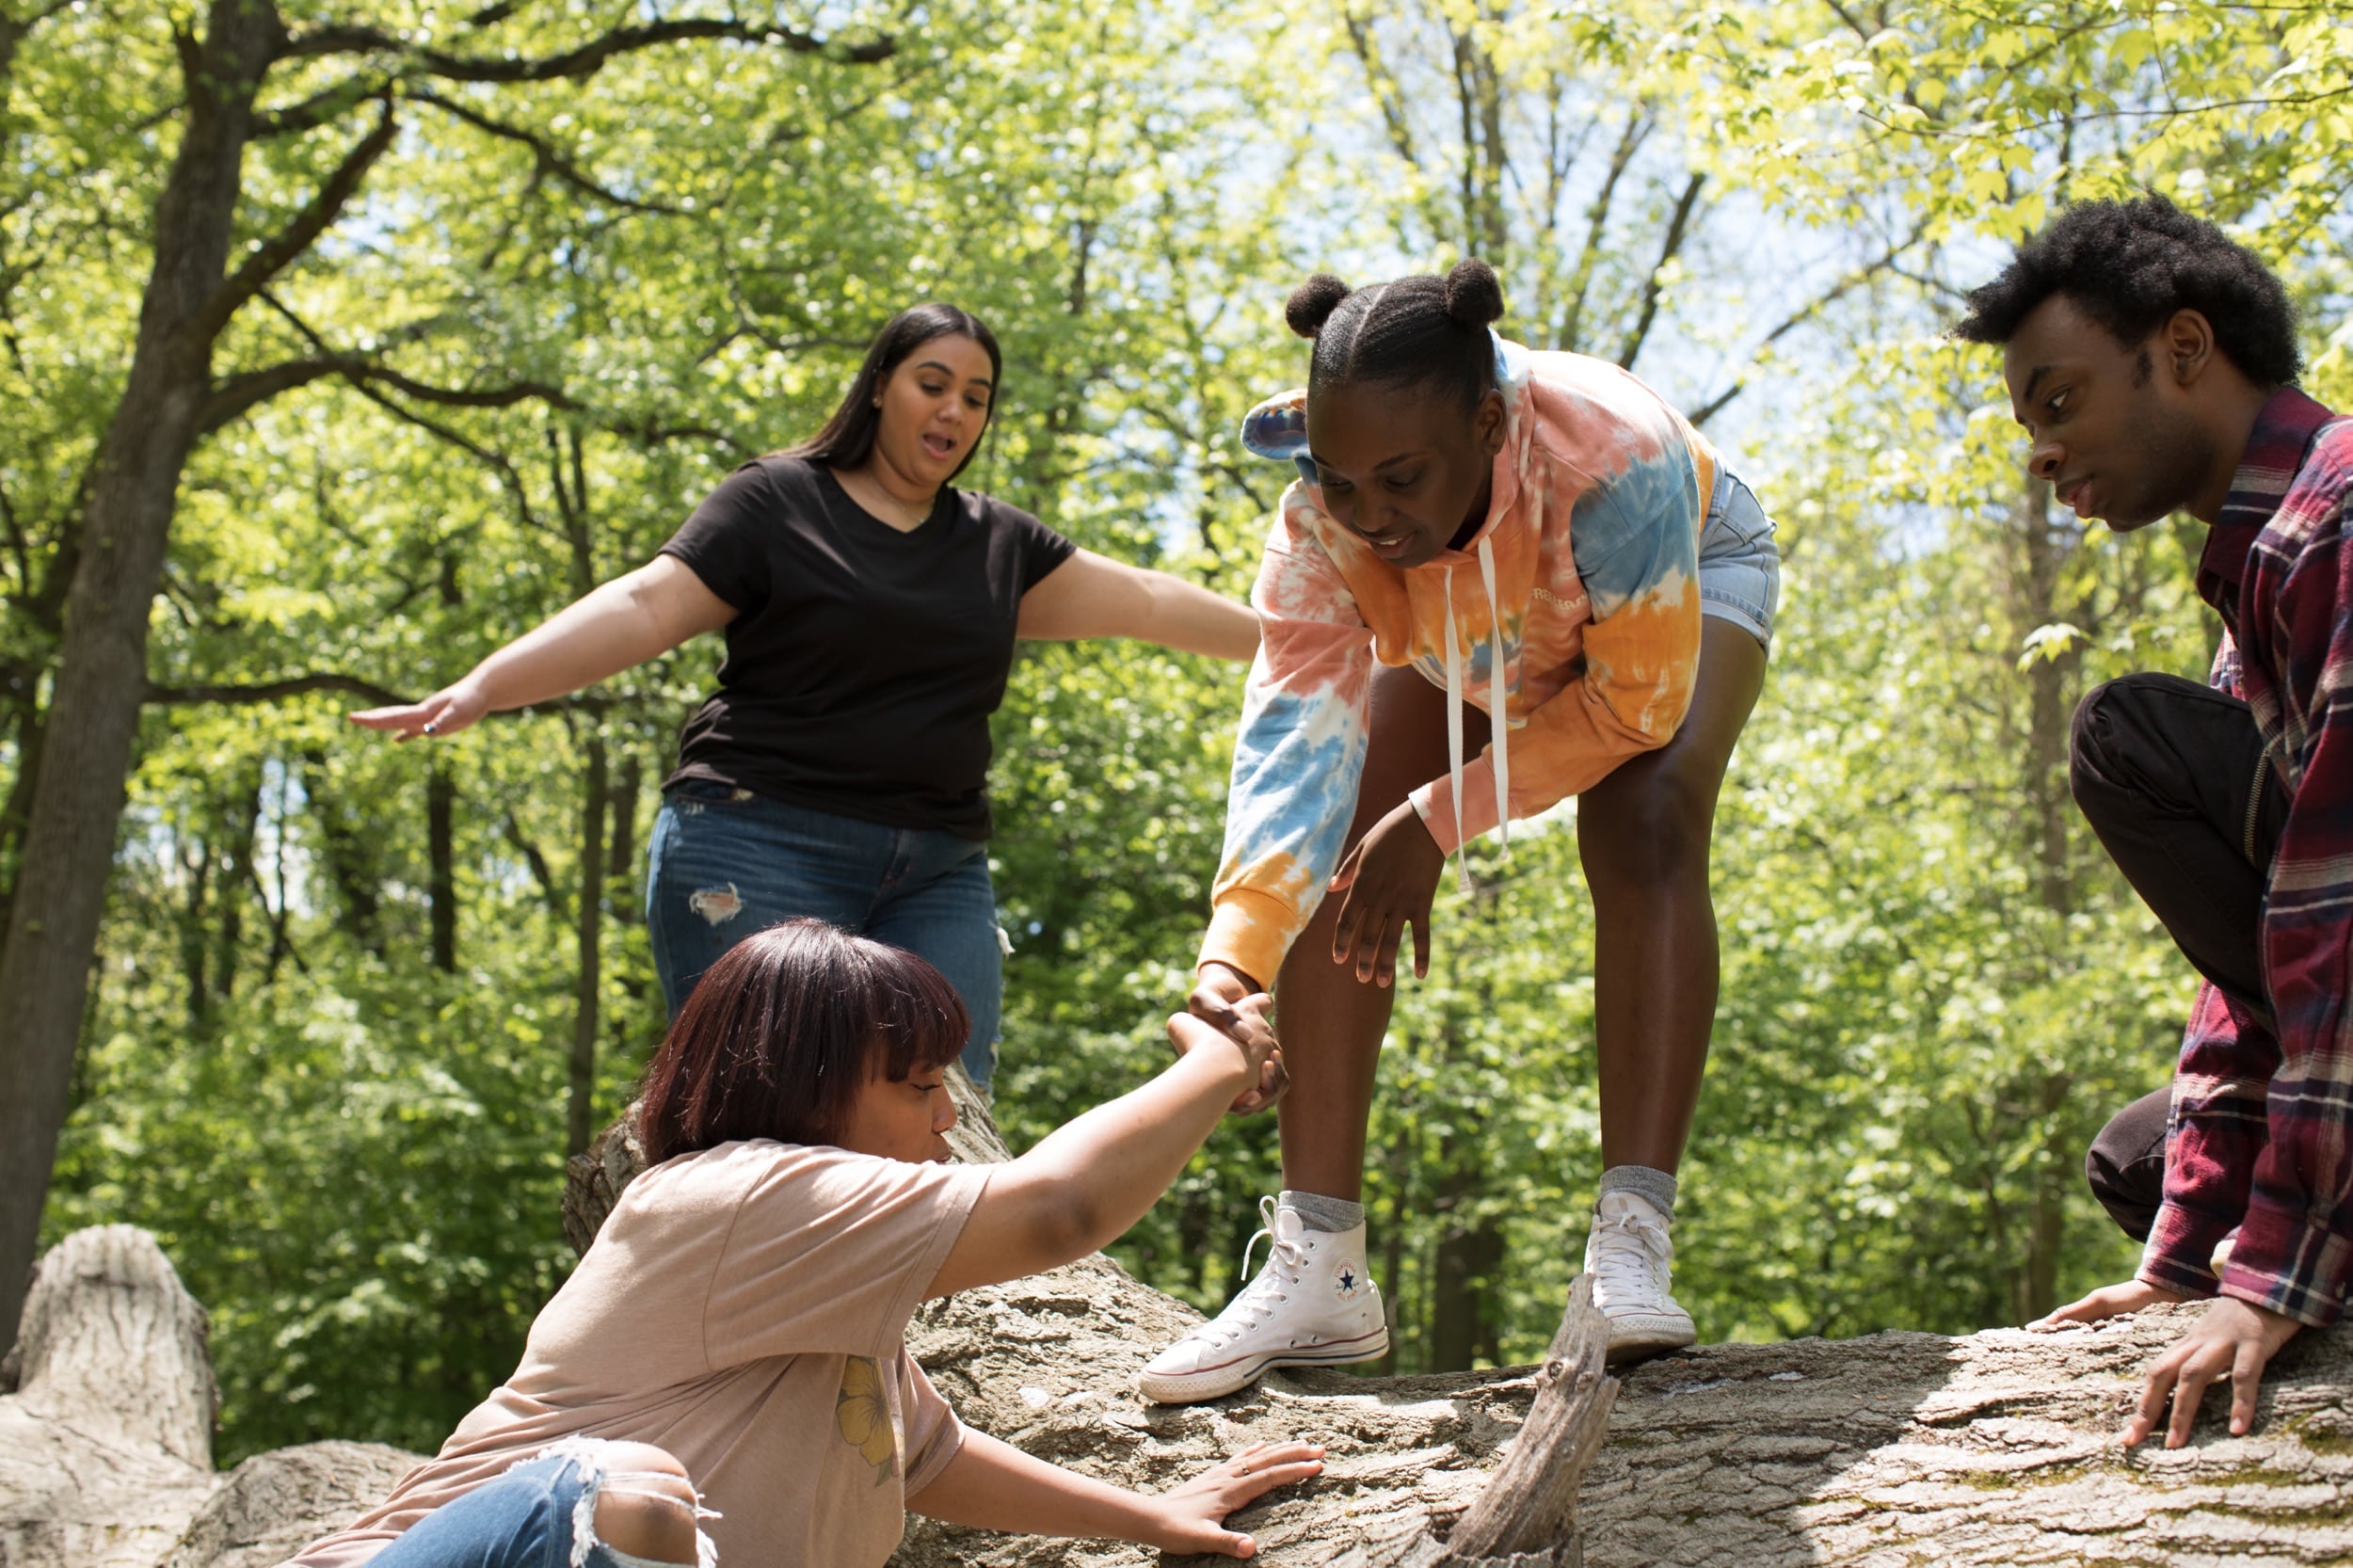 A group of BIPOC youth hiking together through a forest.